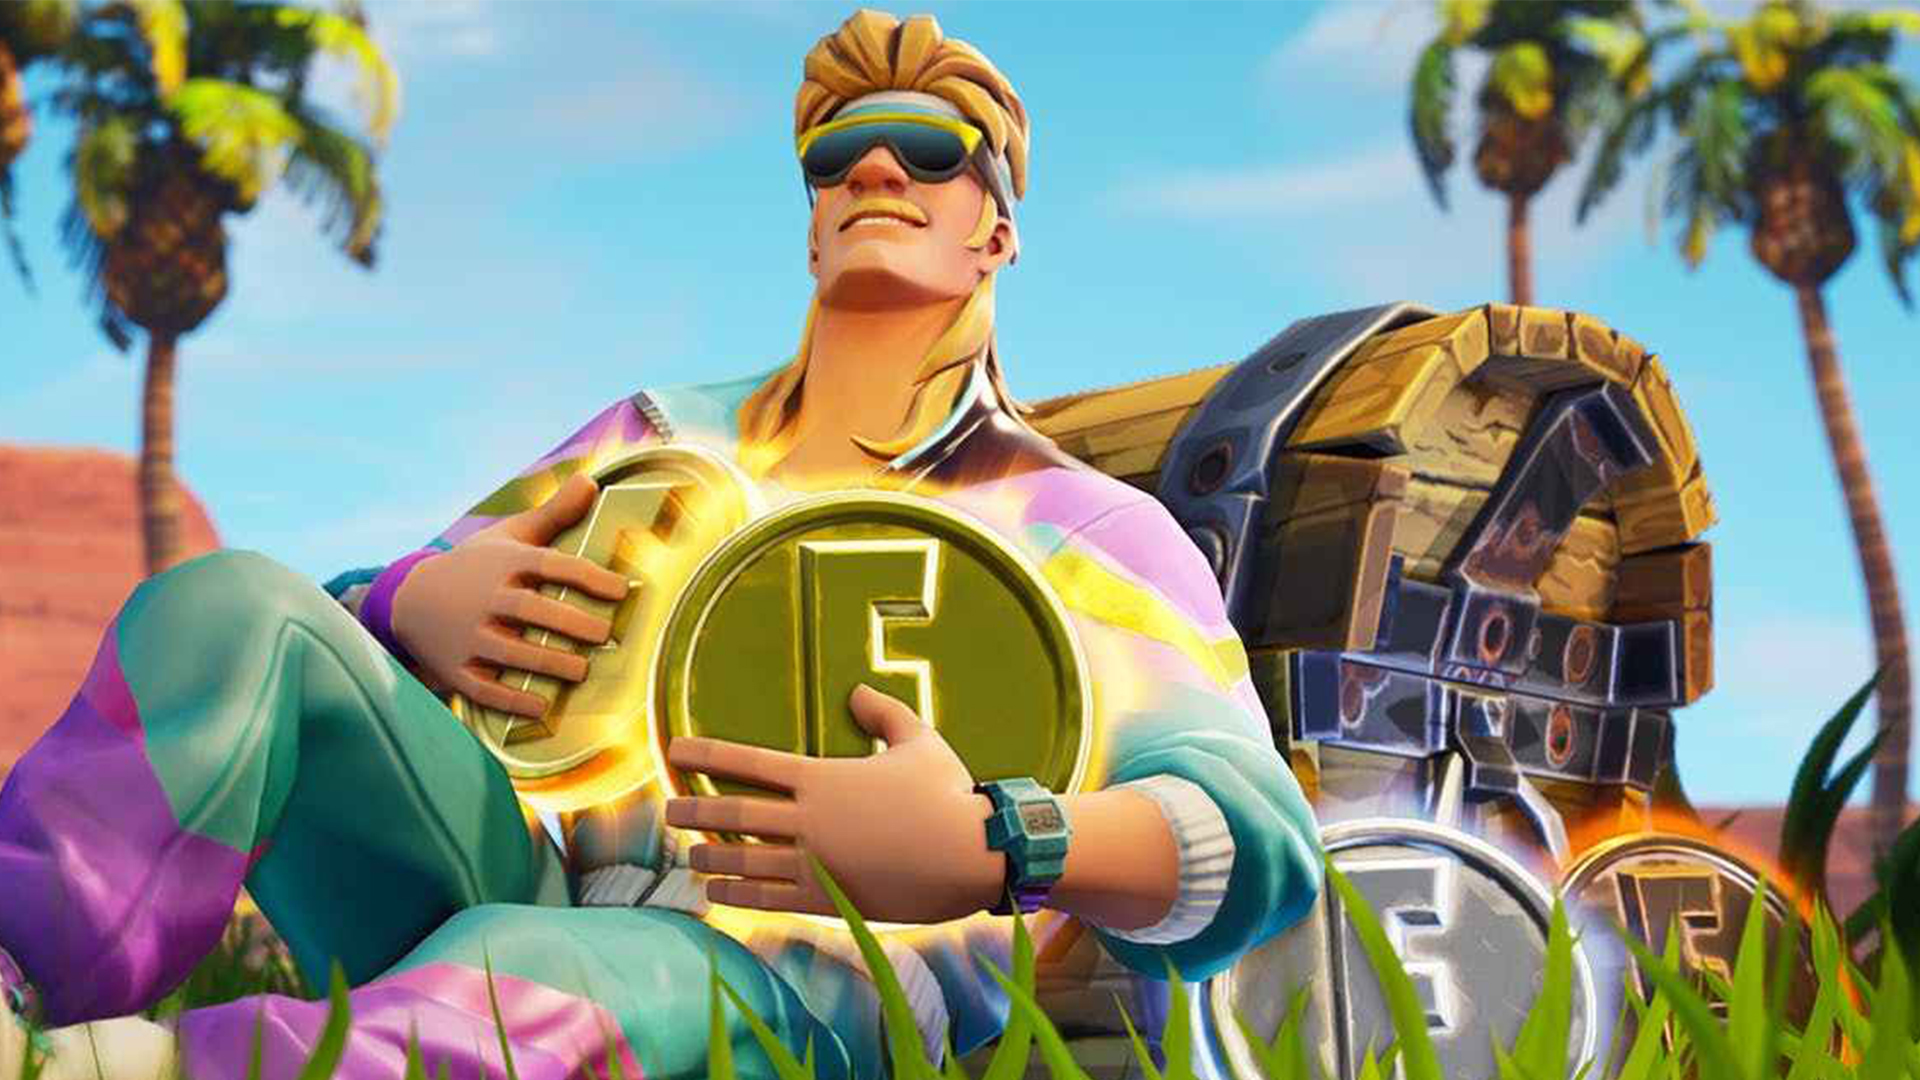 fortnite s season 8 battle pass will be available for free - build lol fortnite